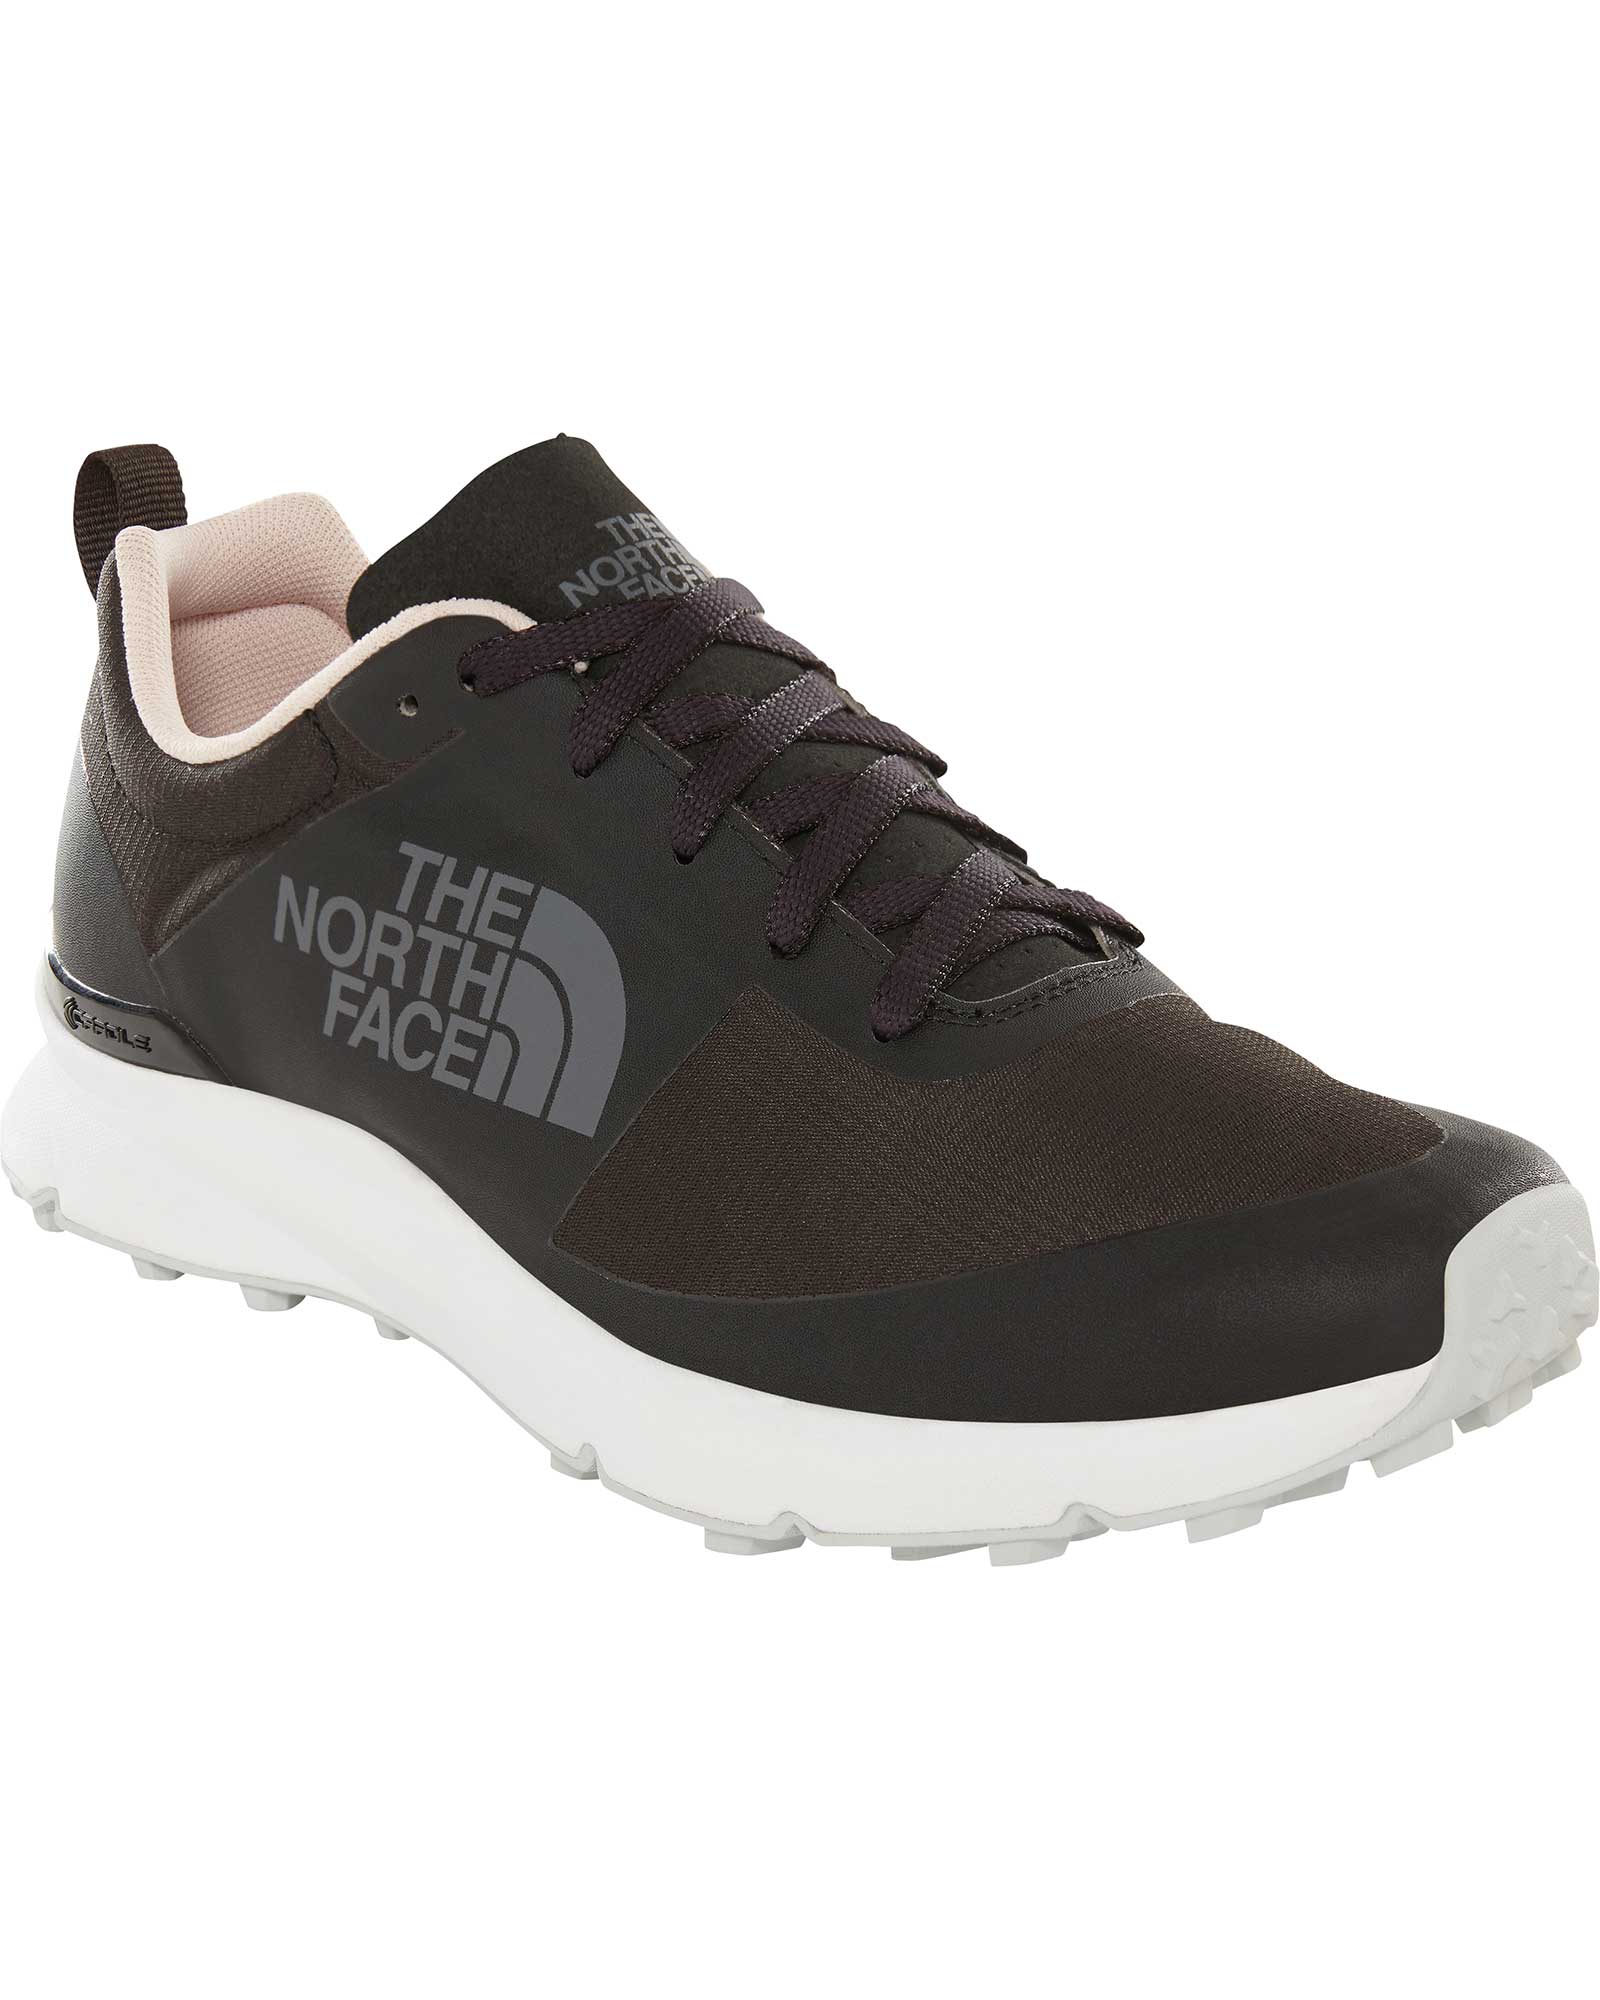 The North Face Milan Womens Shoes